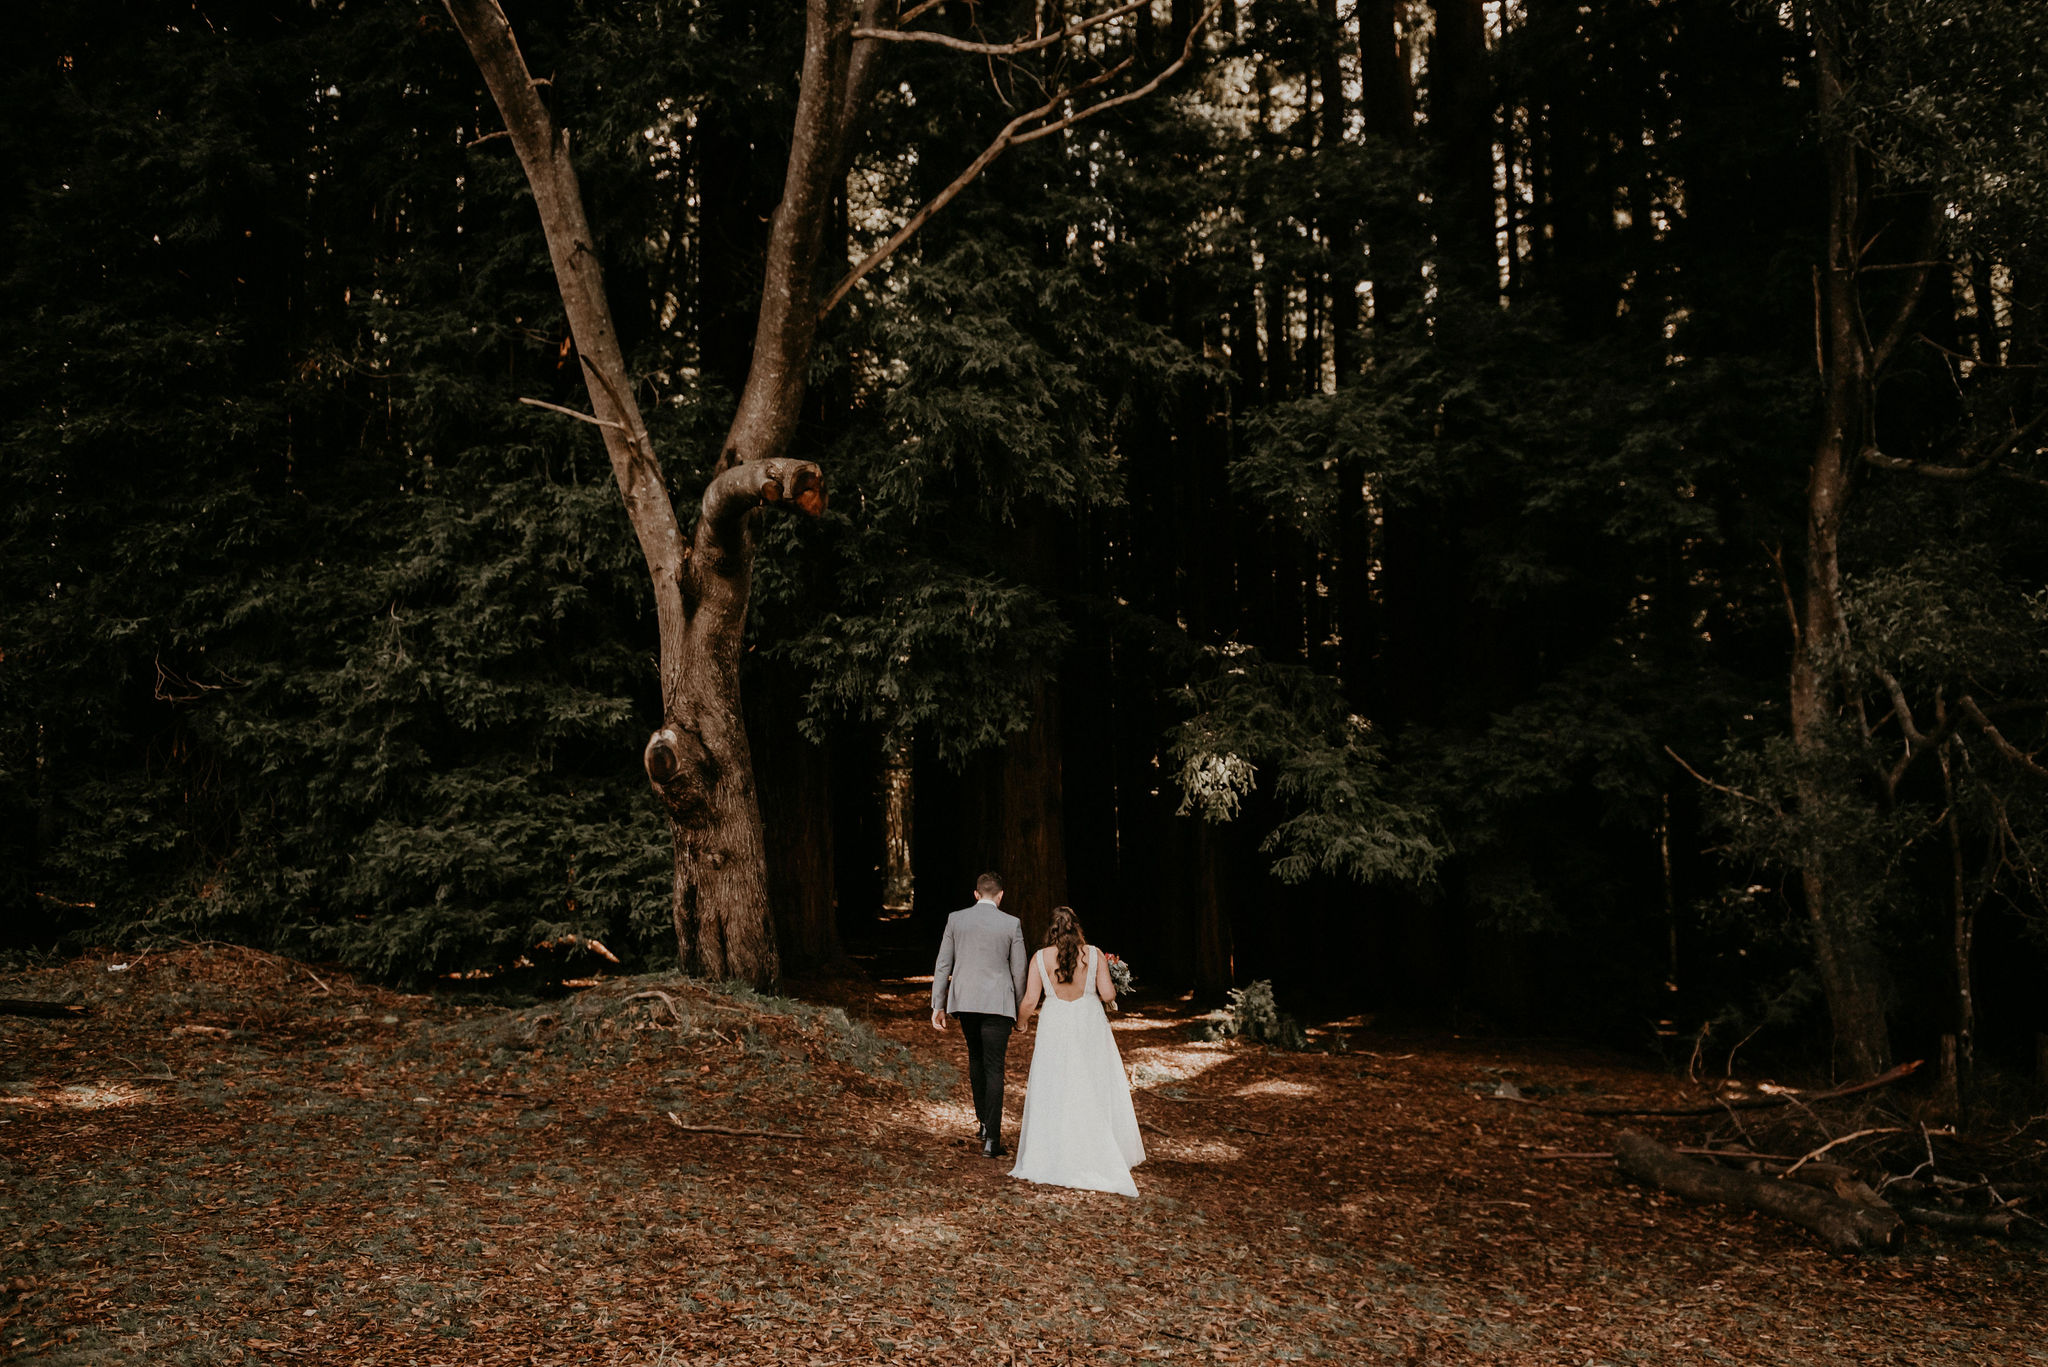 Lets-Elope-Melbourne-Celebrant-Photographer-Elopement-Package-Victoria-Sarah-Matler-Photography-Videography-Video-Warburton-Redwood-Forest-weddings-intimate-6